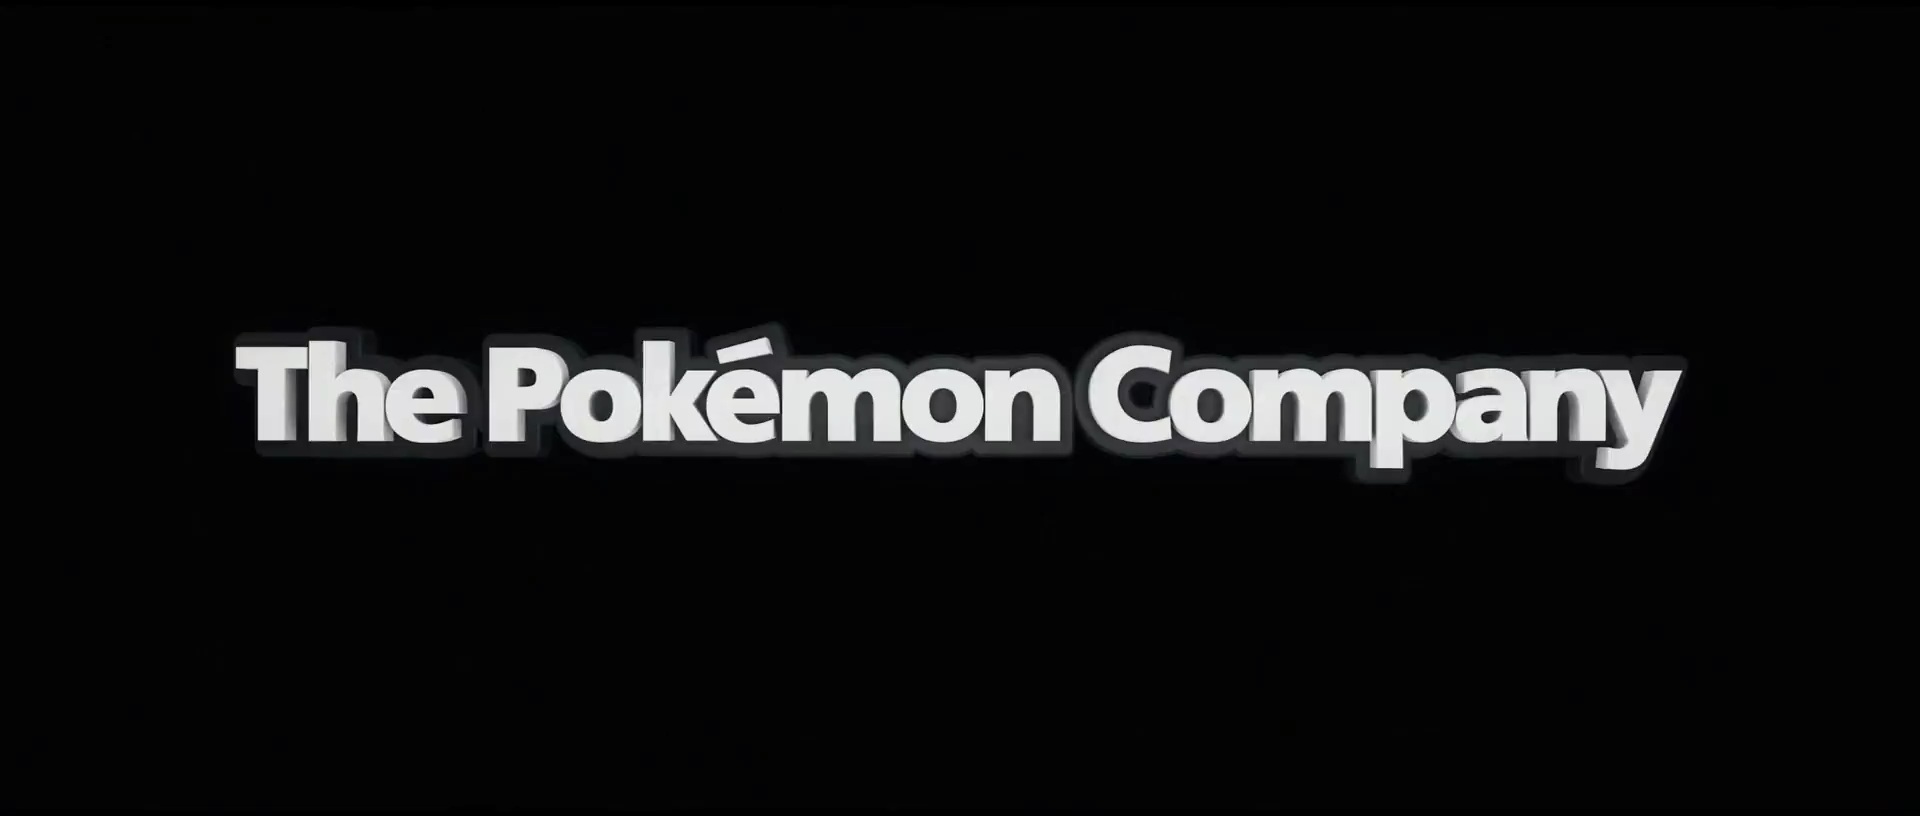 Watch 'Detective Pikachu' Edited With The Classic Pokemon Theme - Heroic  Hollywood